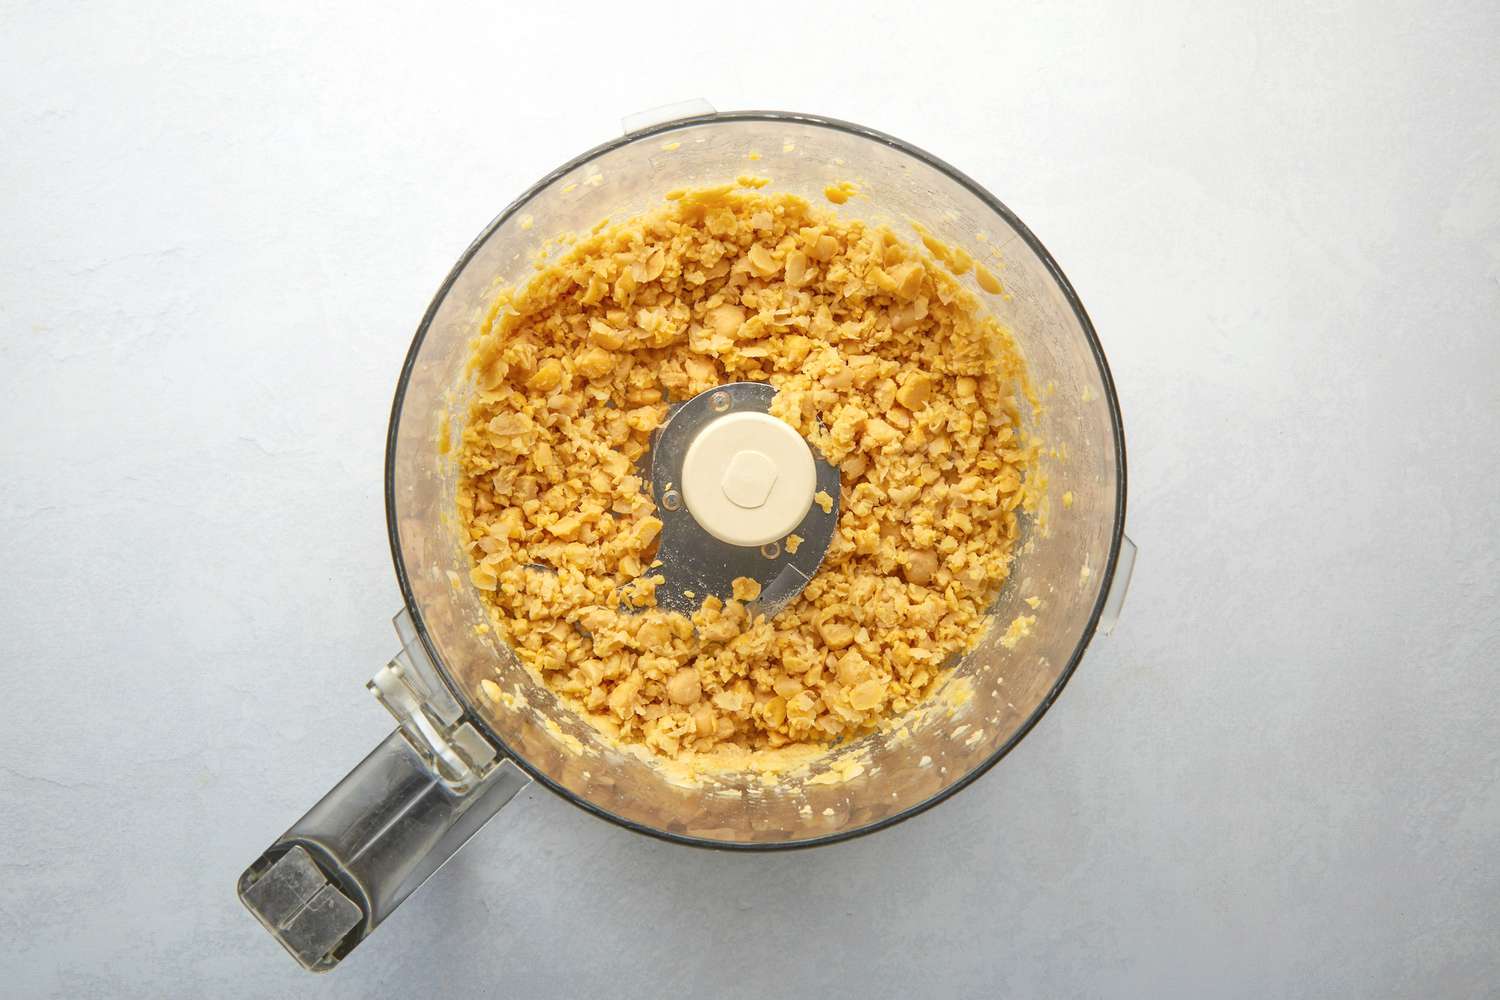 A food processor with crumbled up chickpeas